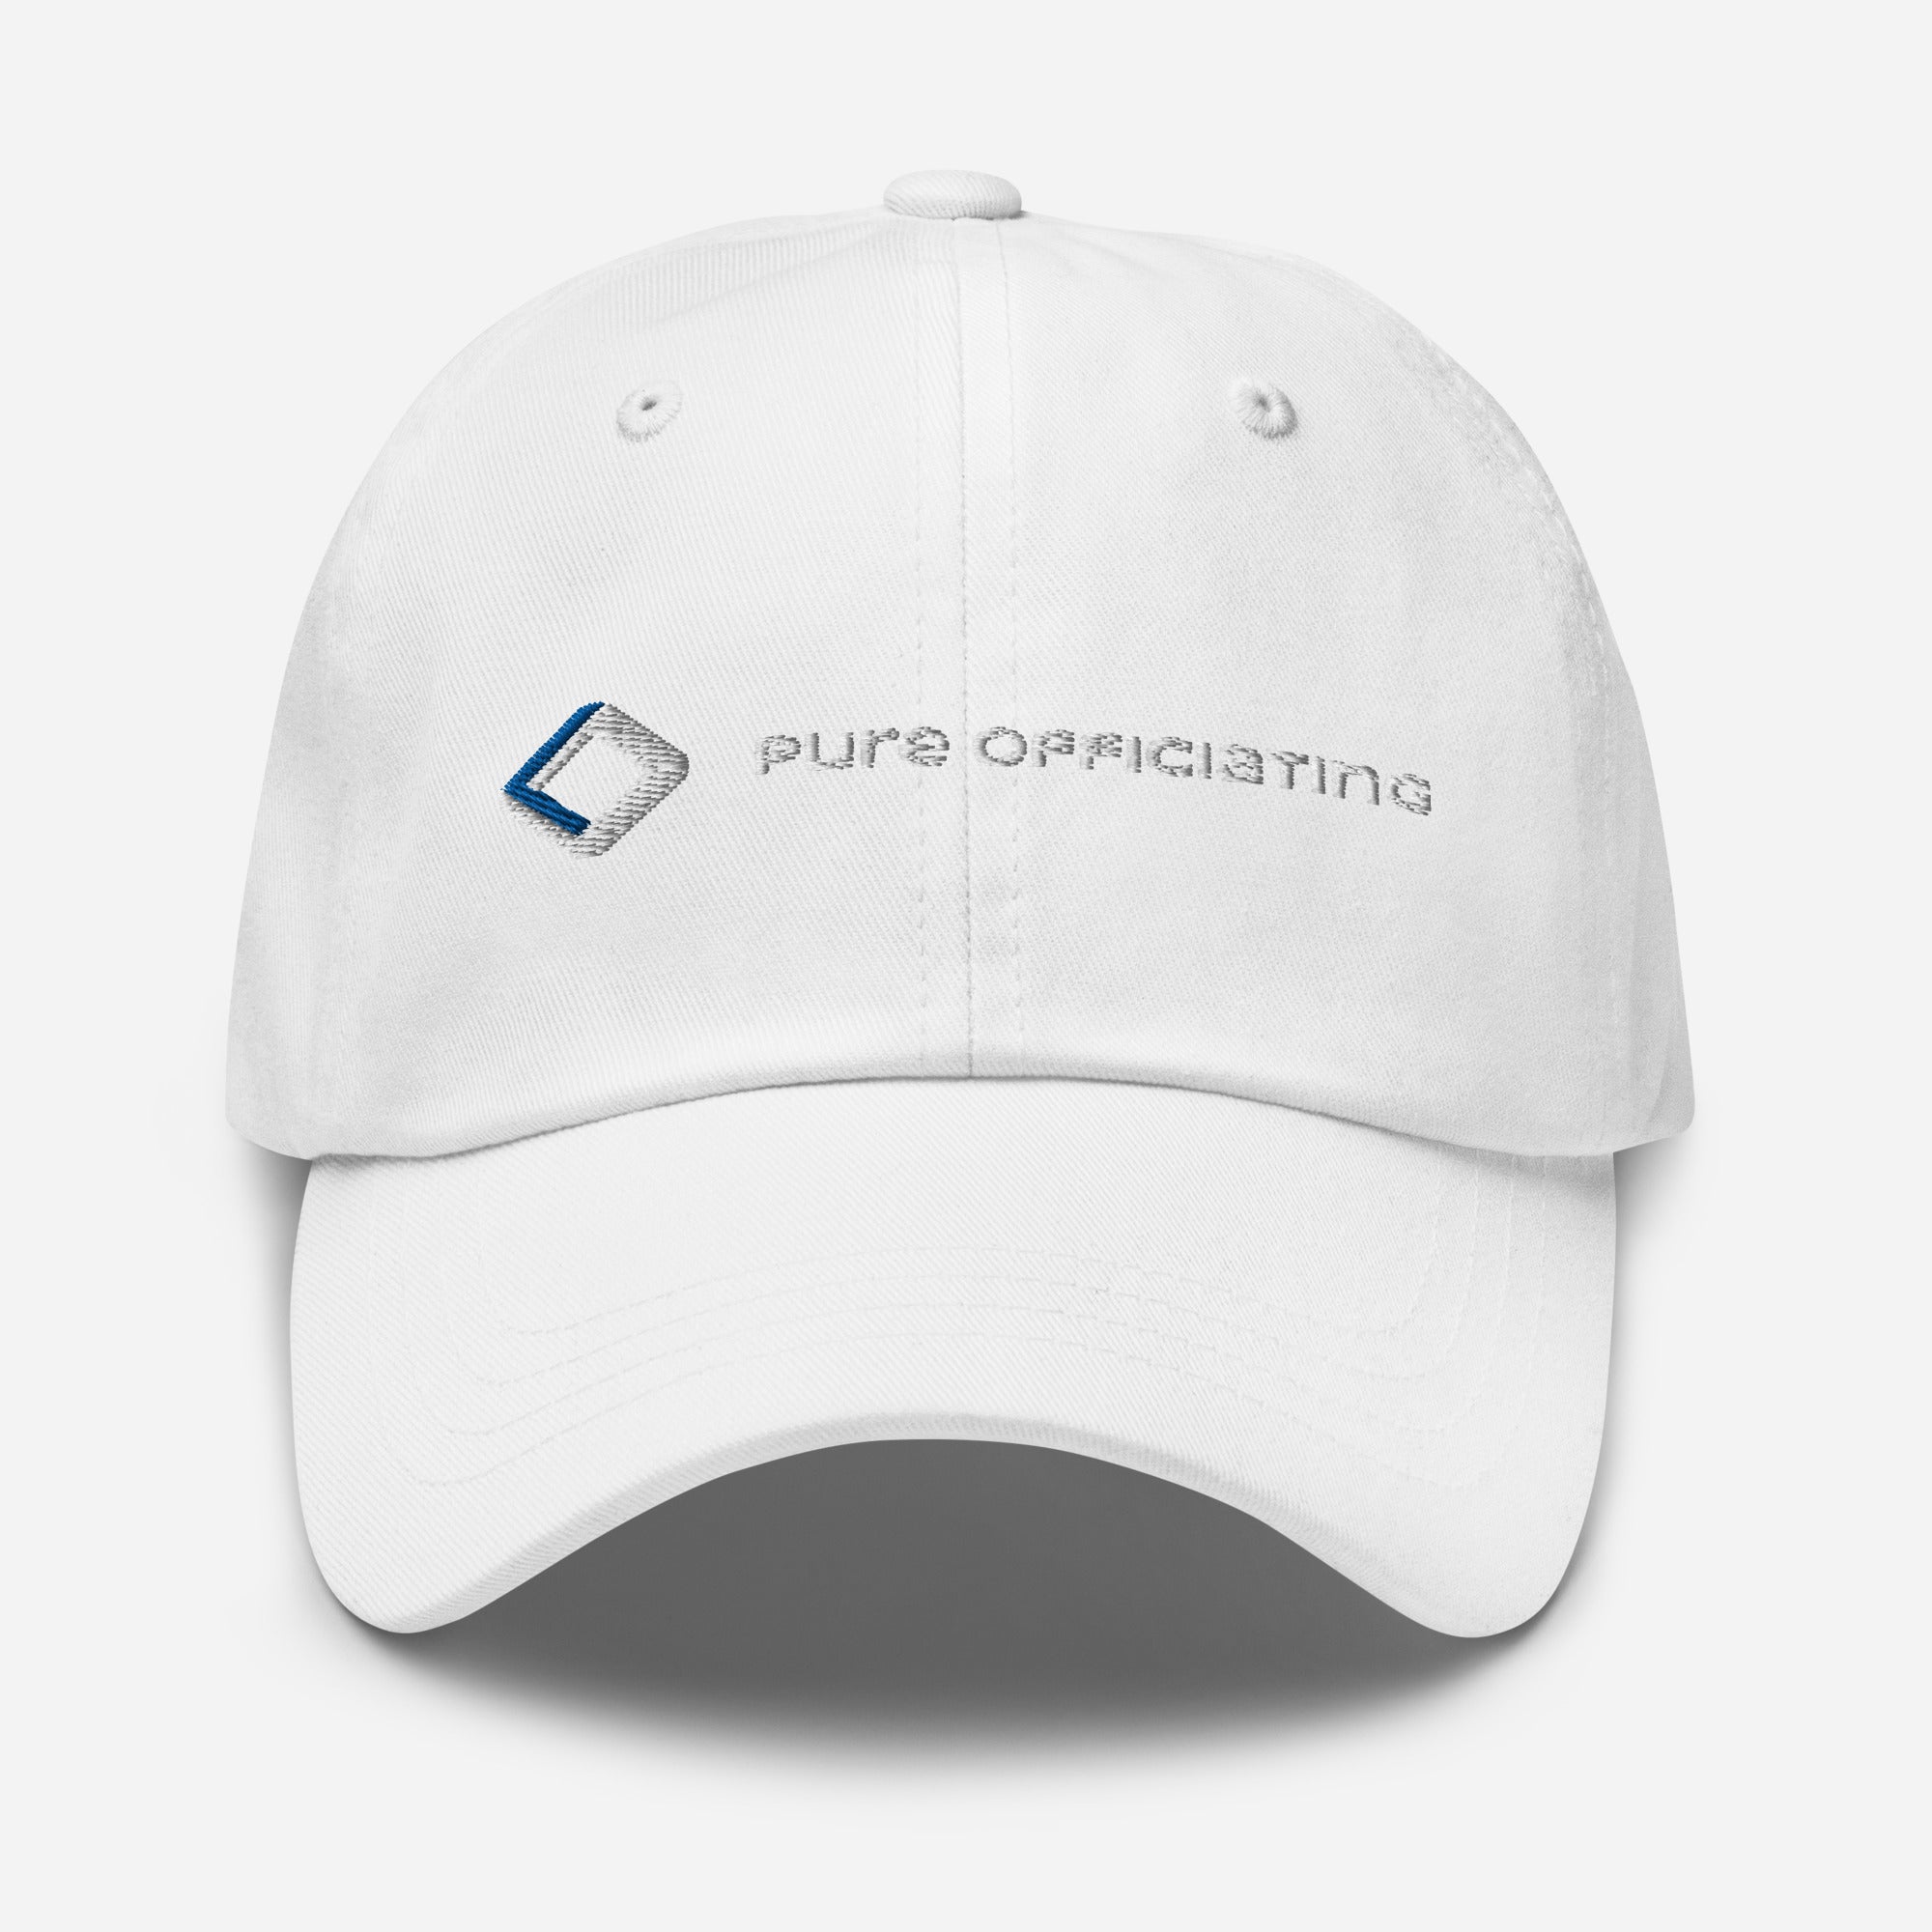 PURE OFFICIATING Dad hat